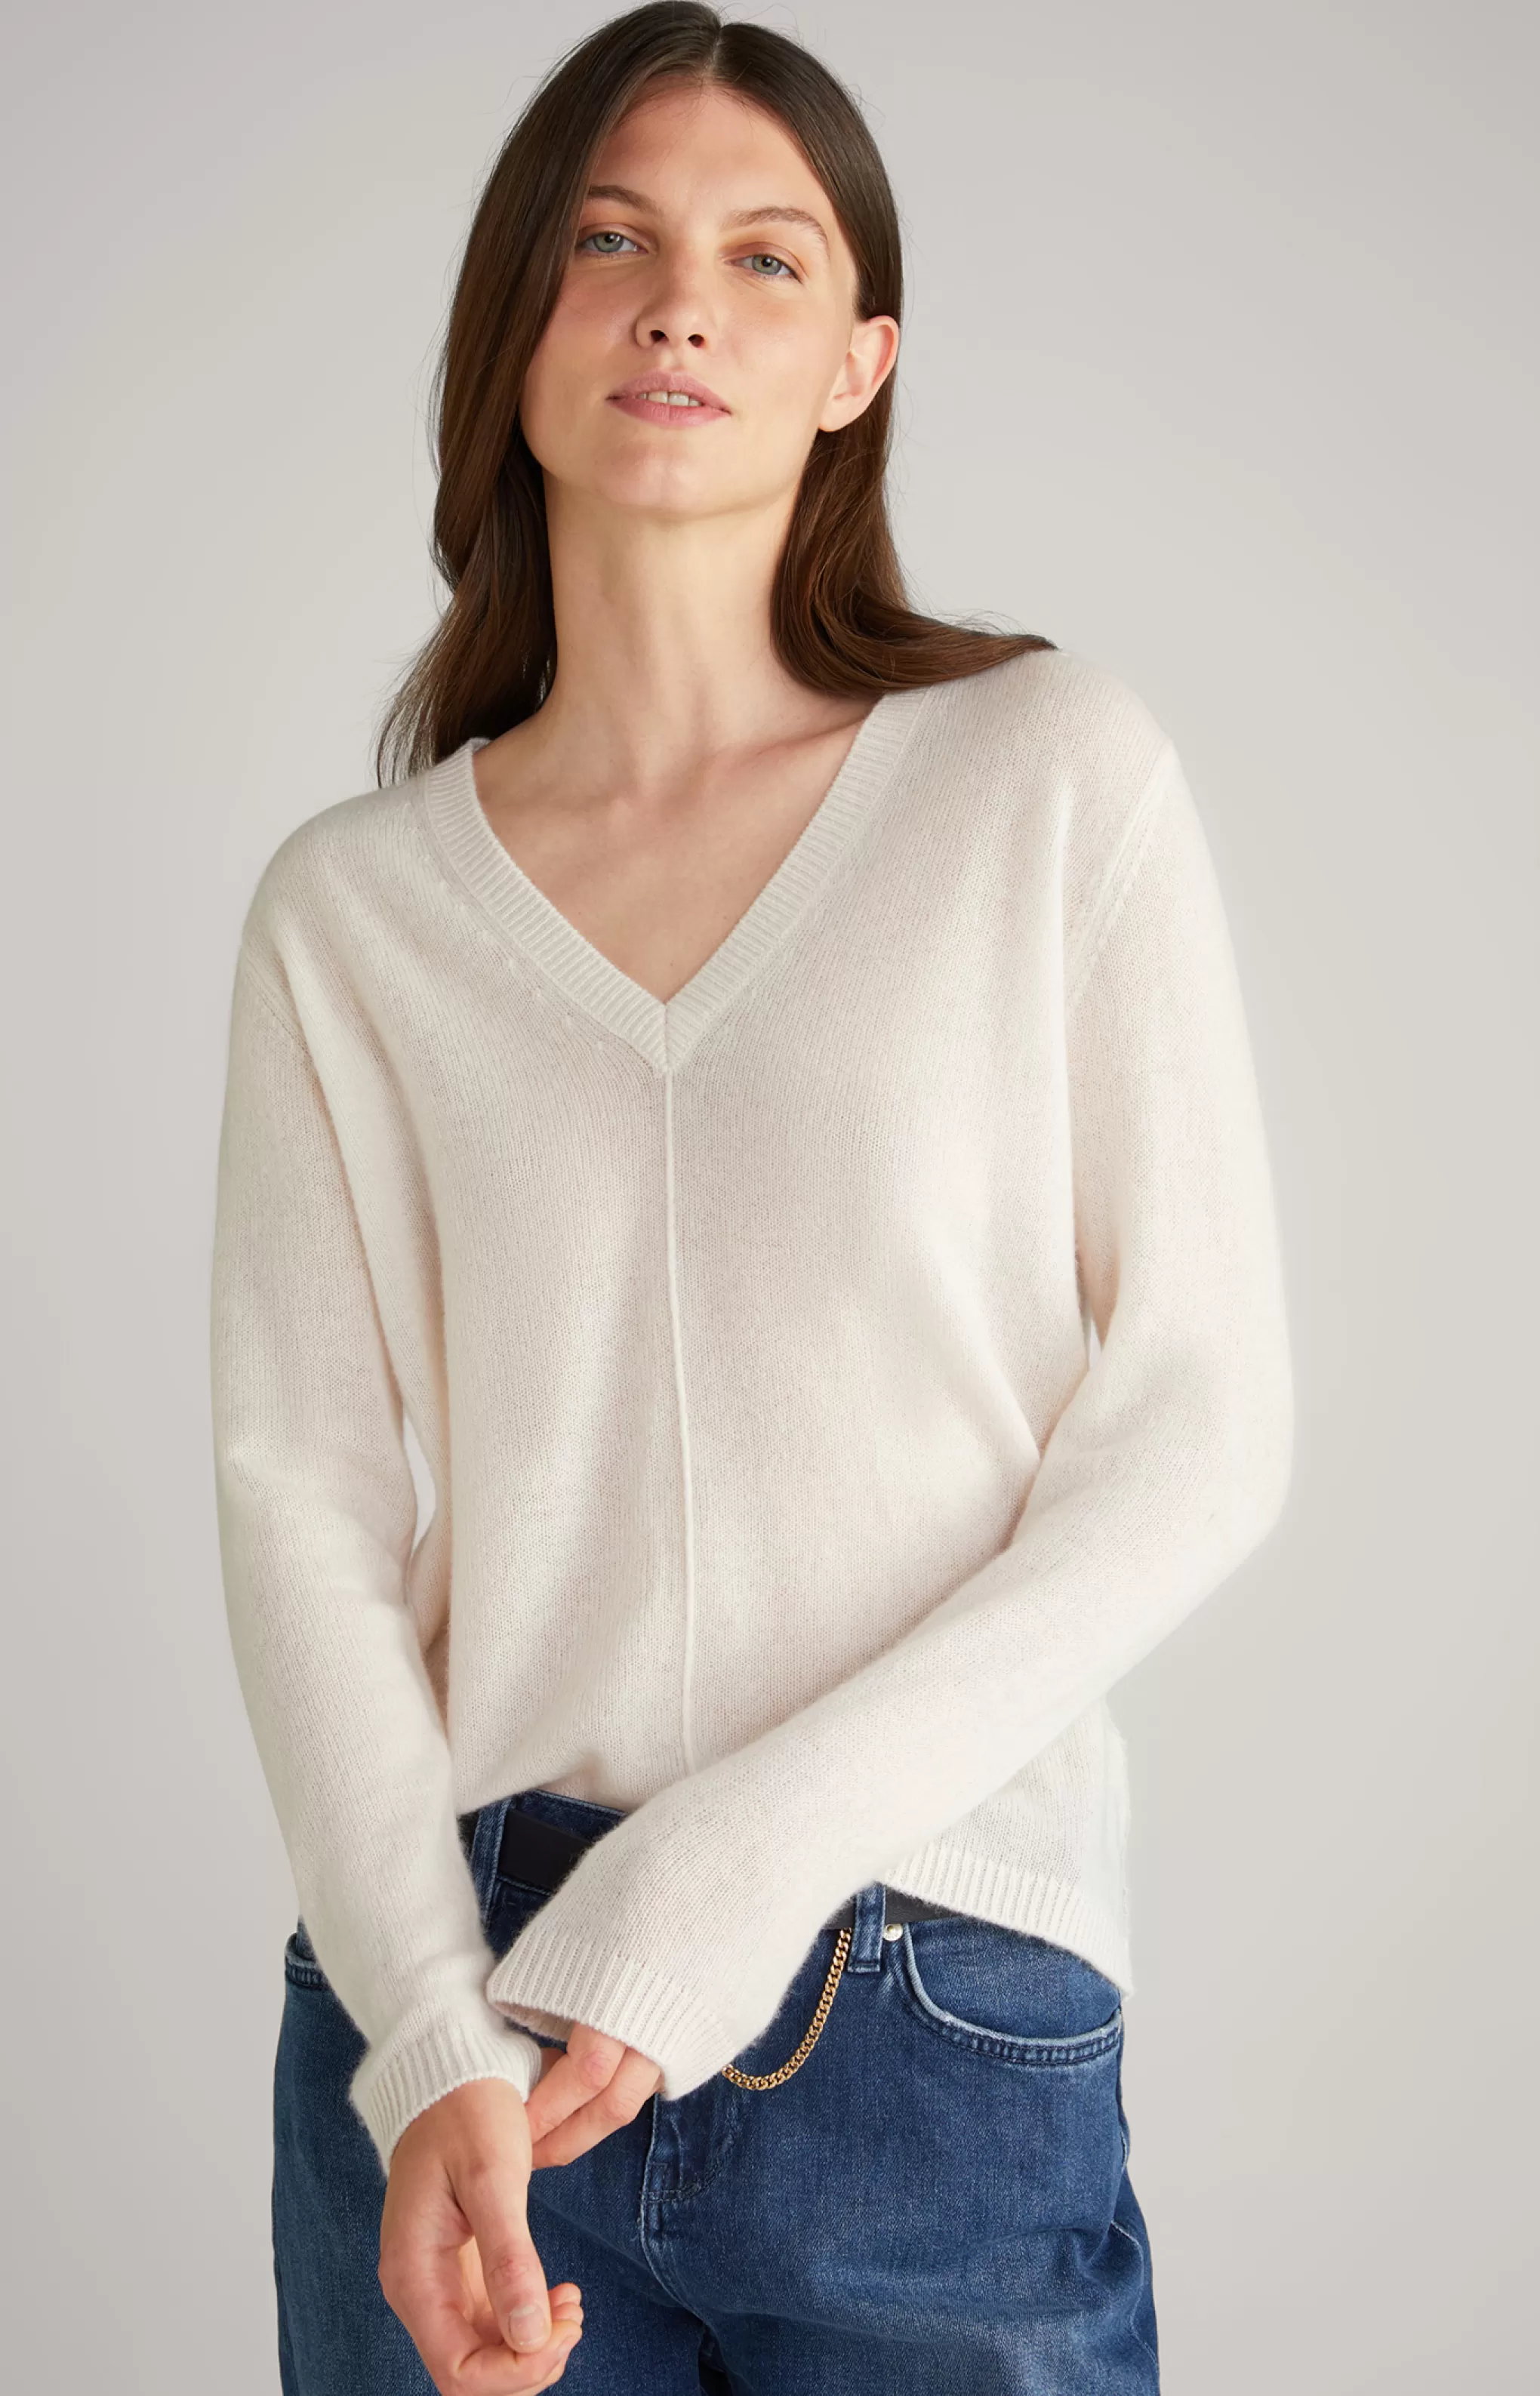 Knitwear | Clothing*JOOP Knitwear | Clothing Cashmere Knitted Pullover in